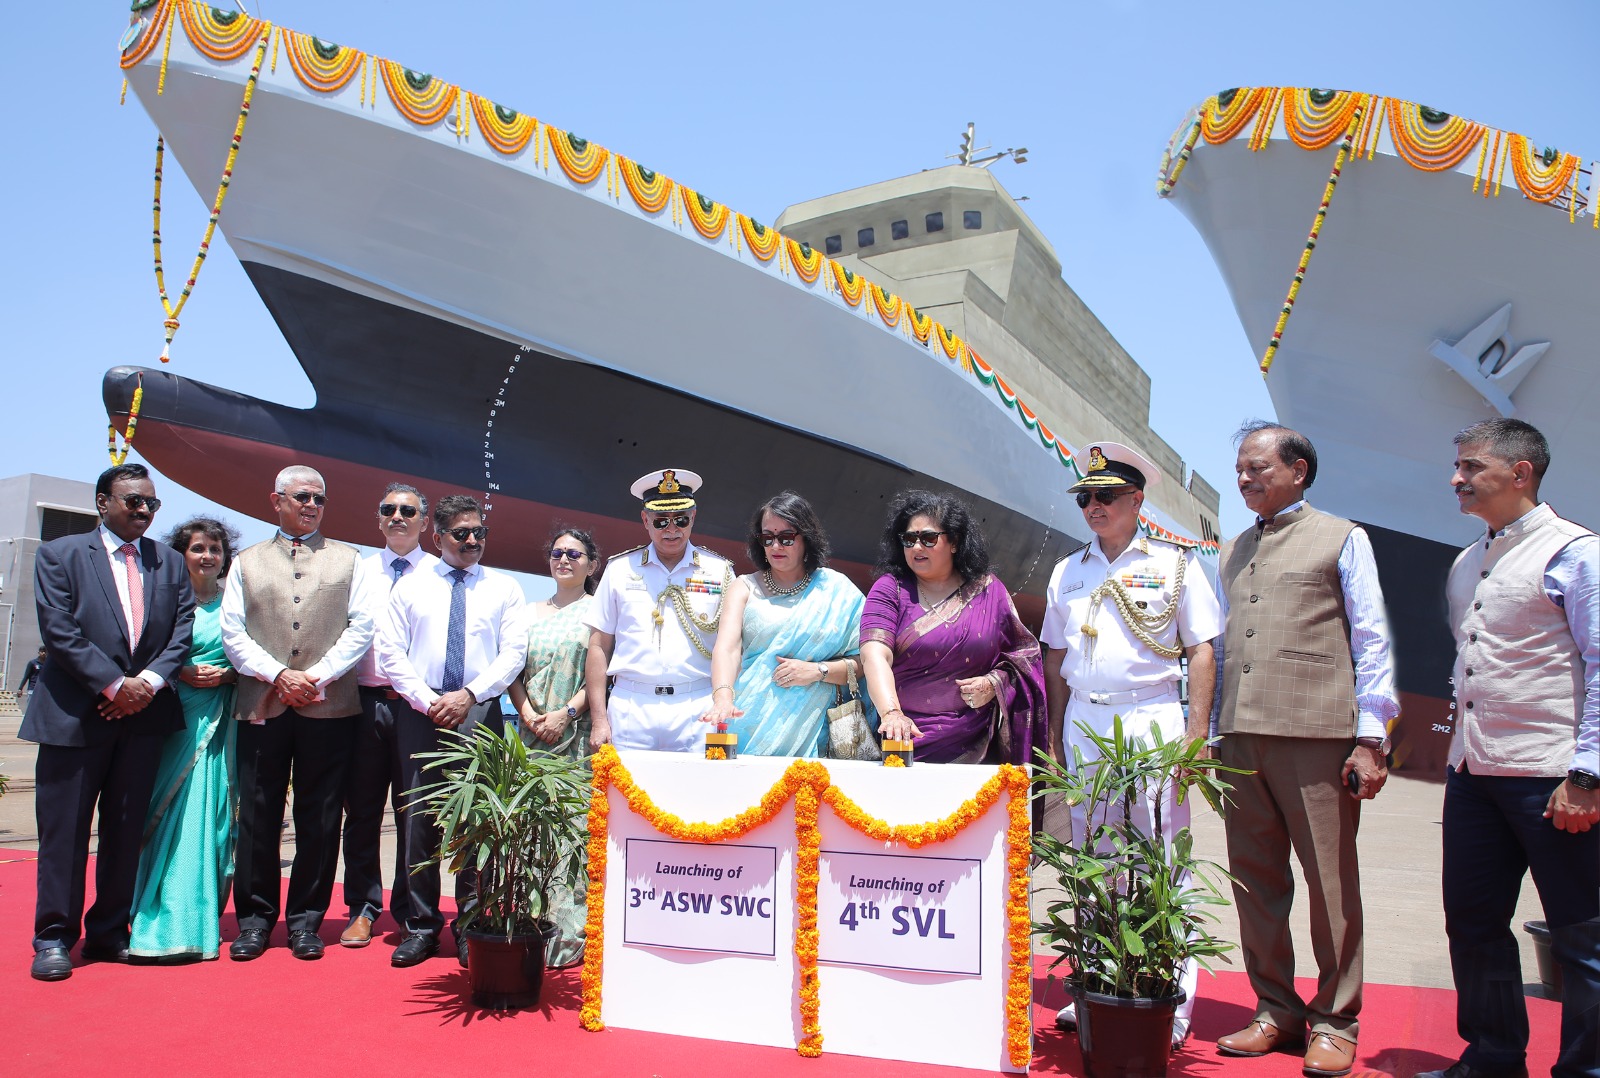 Launch of 4th Survey Vessel (Large) - Yard 3028, 3rd ASWSWC - Yard 3030 & Keel Laying of 7th ASWSWC - Yard 3032 on 13 Jun 23